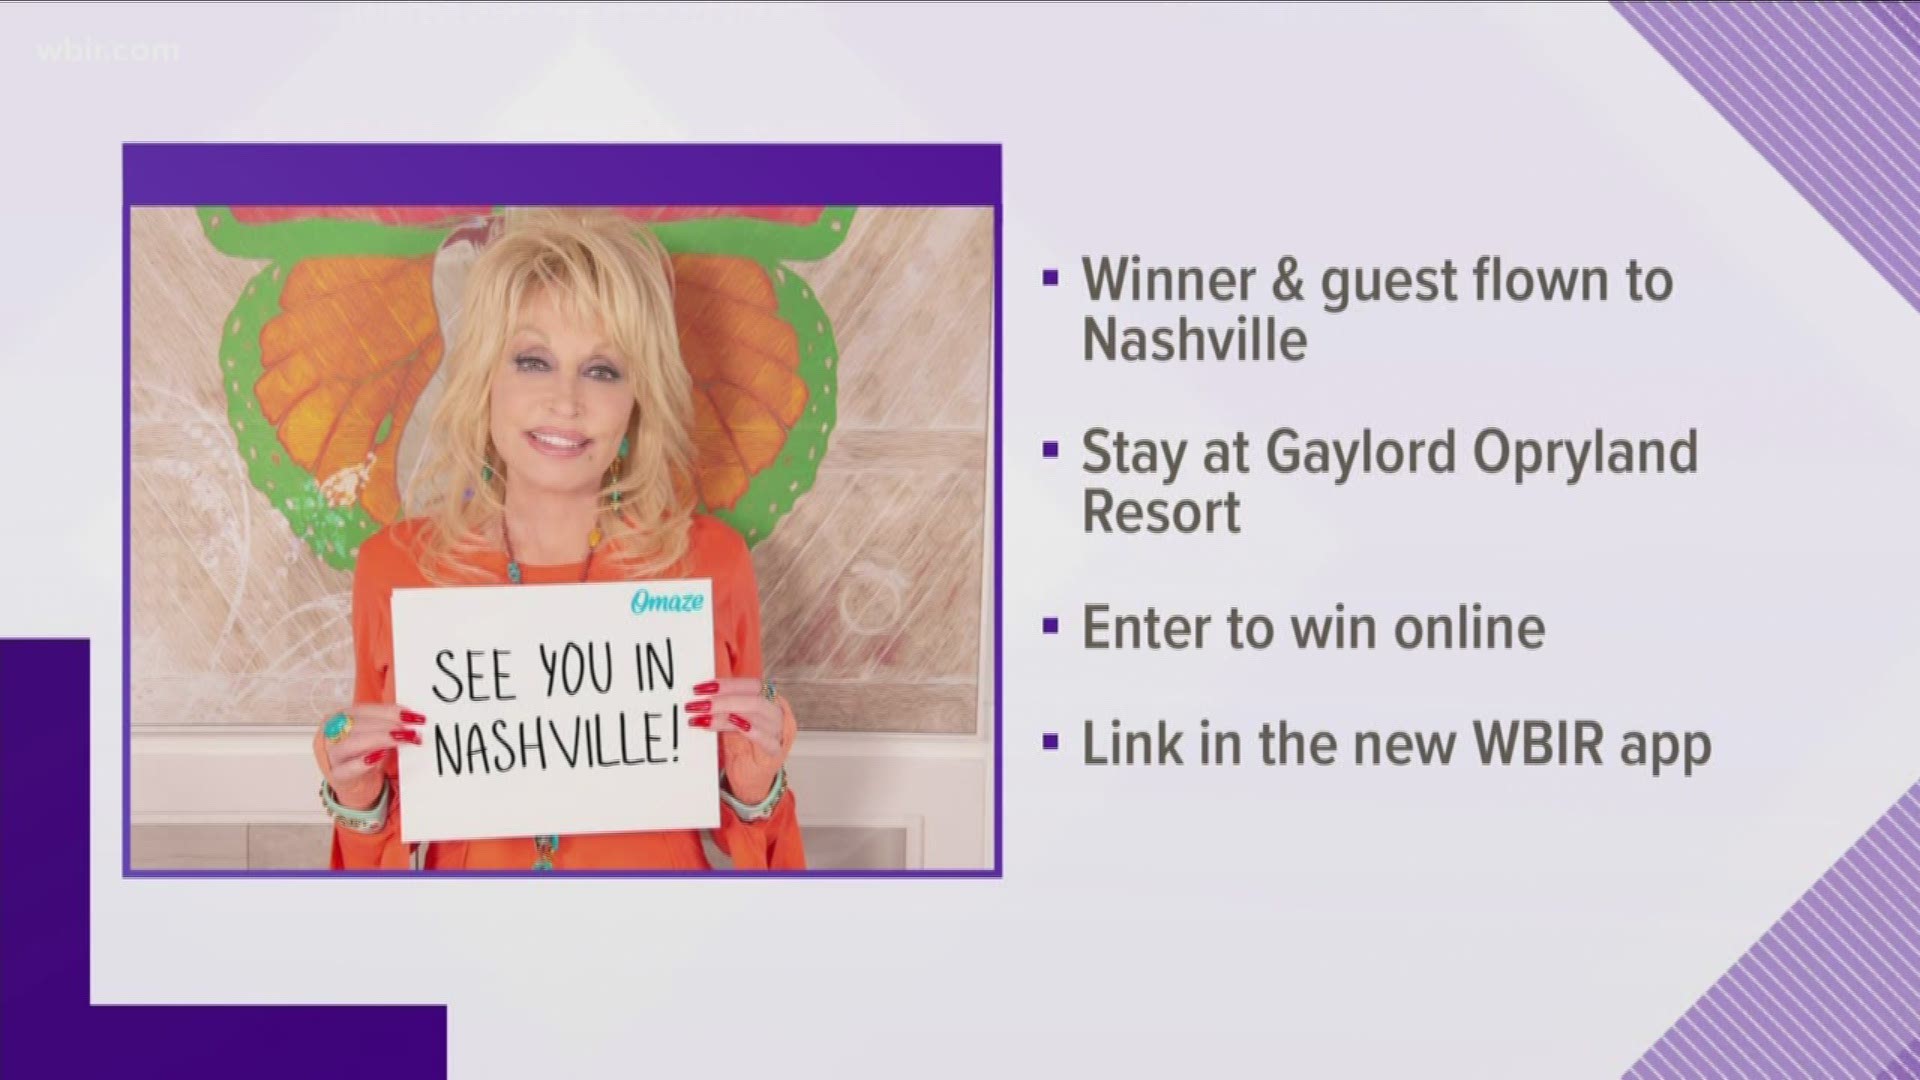 Dolly Parton is marking 50 years as a Grand Ole Opry member, and she's celebrating by offering you a chance to meet her.